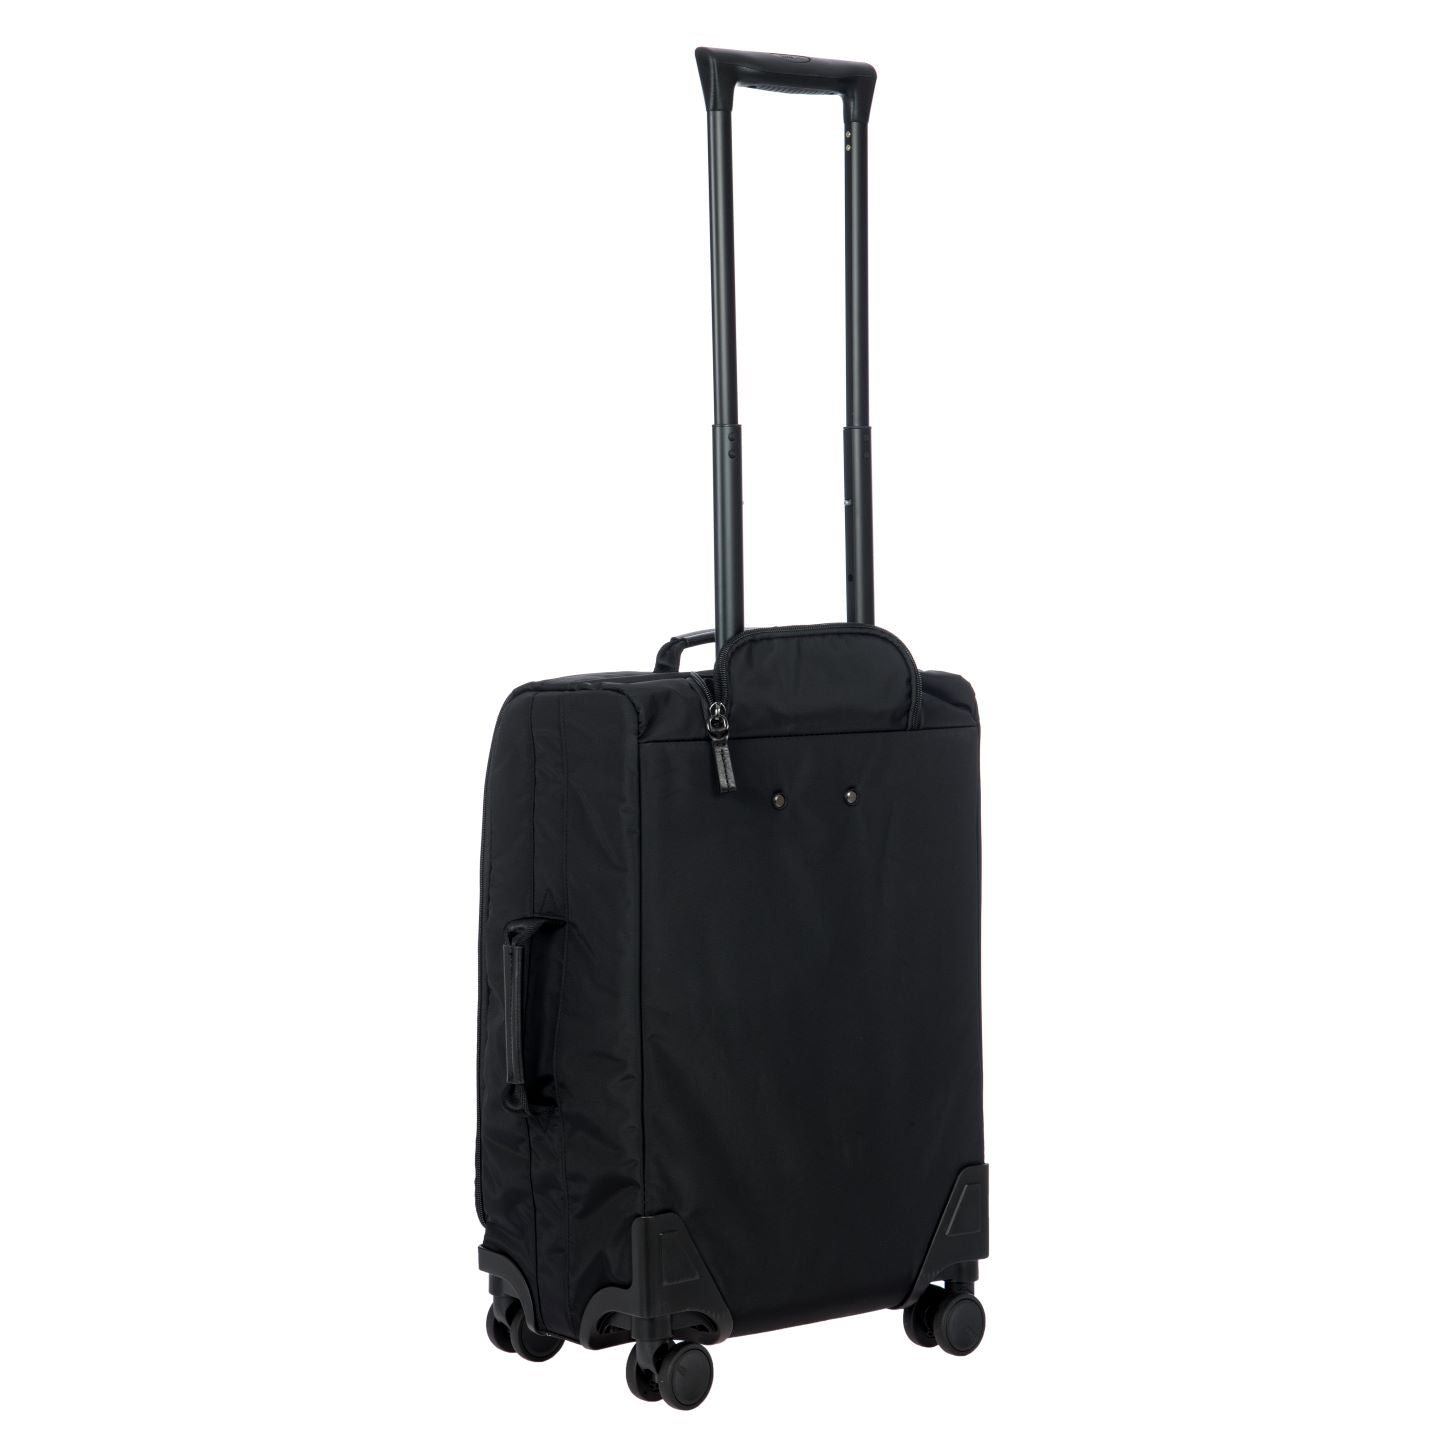 Overwinnen ontrouw contact Brics X-Bag/ X-Travel 21" Spinner with Frame – Luggage Pros